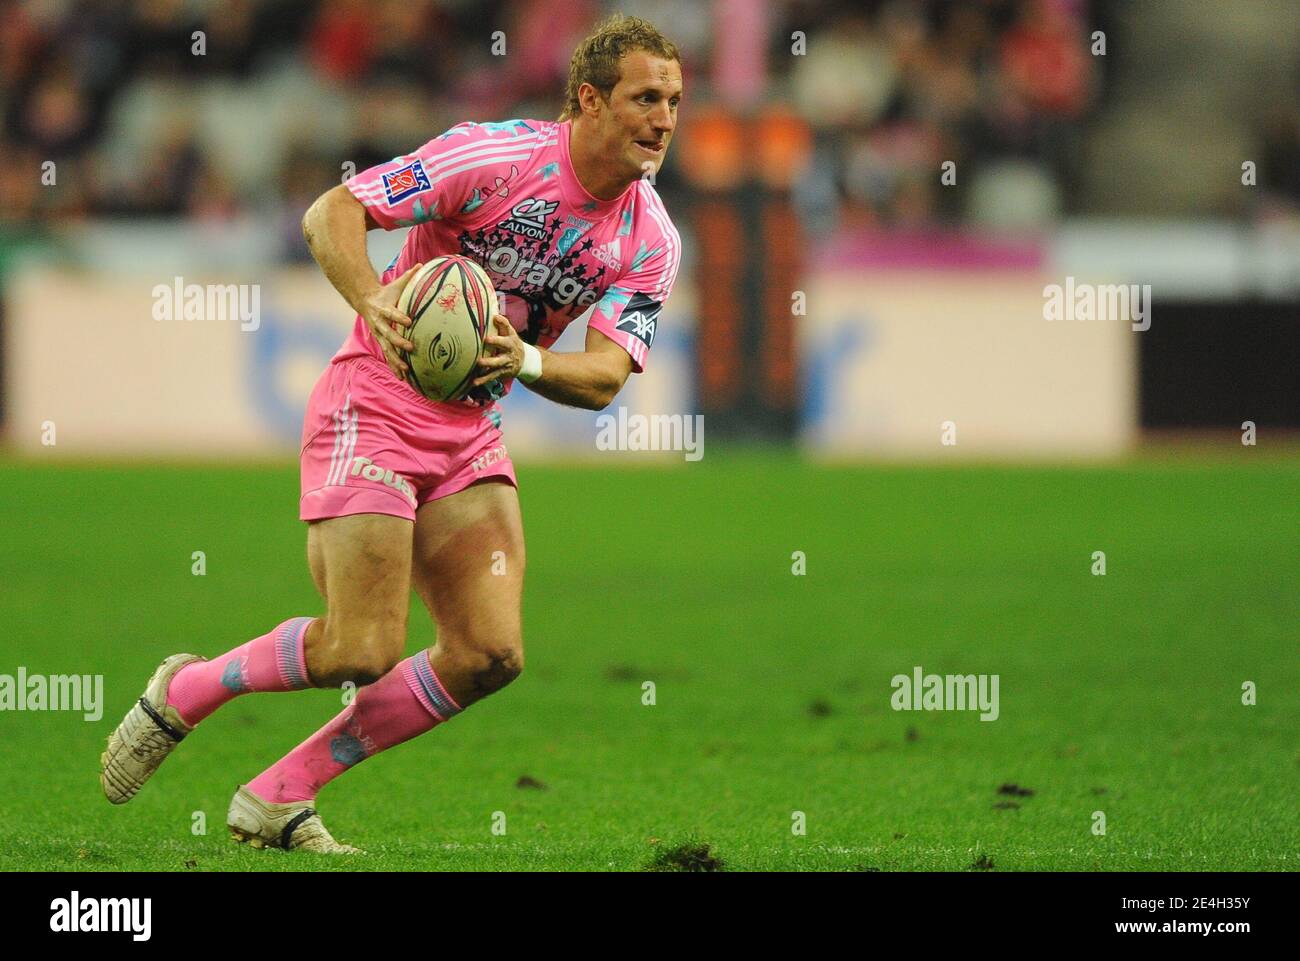 Stade Francais' Gasnier Mark during the French Top 14 Rugby match, Stade  Francais vs Bayonne, in Stade de France, St-Denis, near Paris, France, on  December 5,2009. Stade Francais won 34-10. Photo by